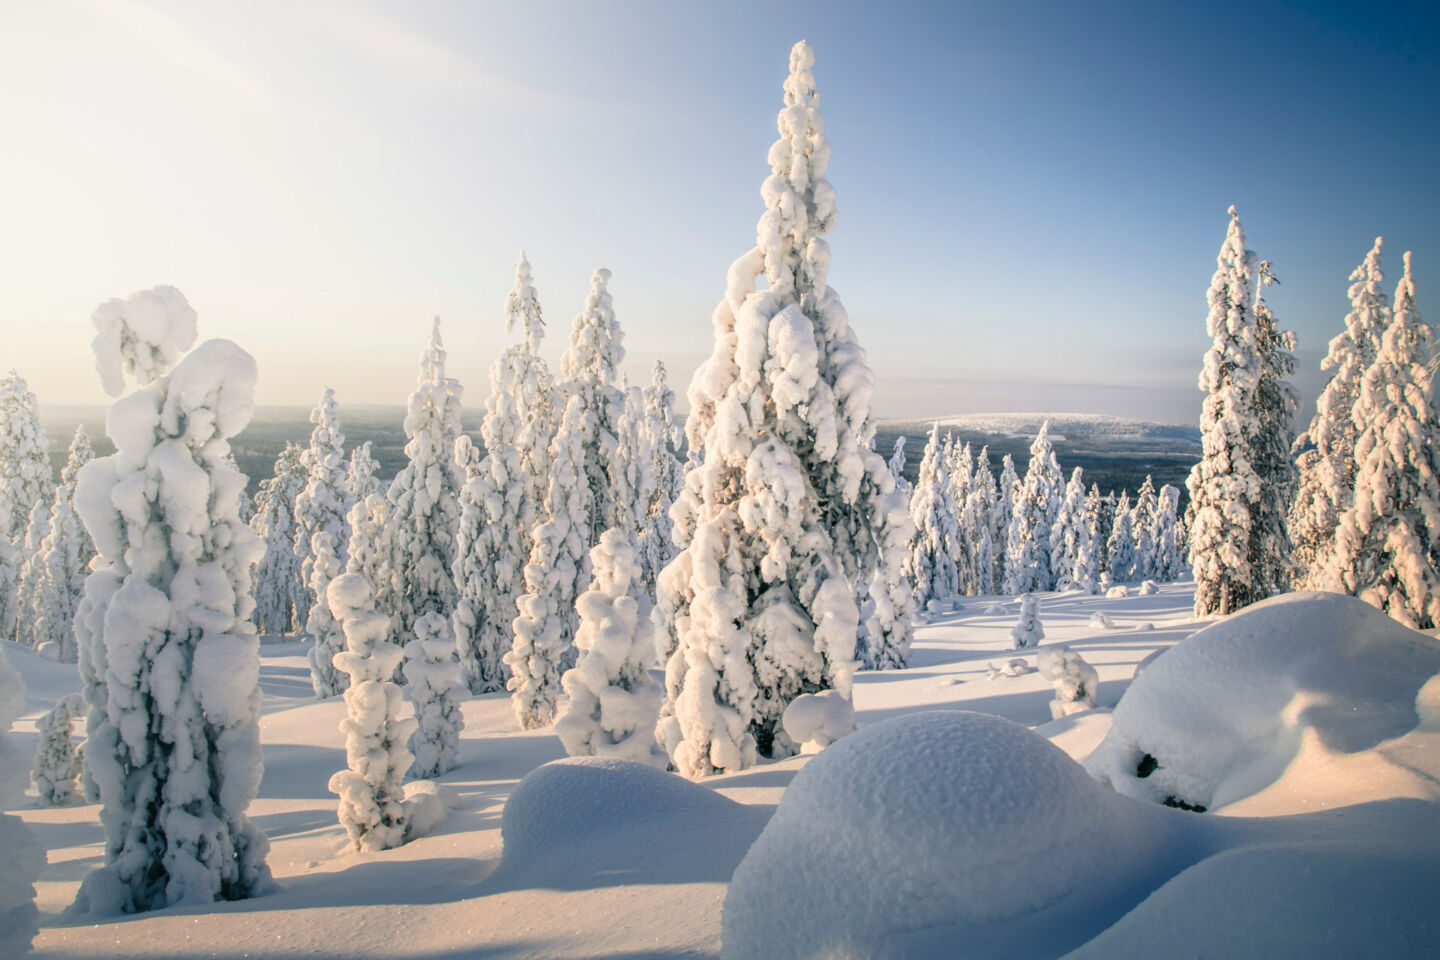 A sunny winter day in the forest of Salla, a wilderness film location in Finnish Lapland